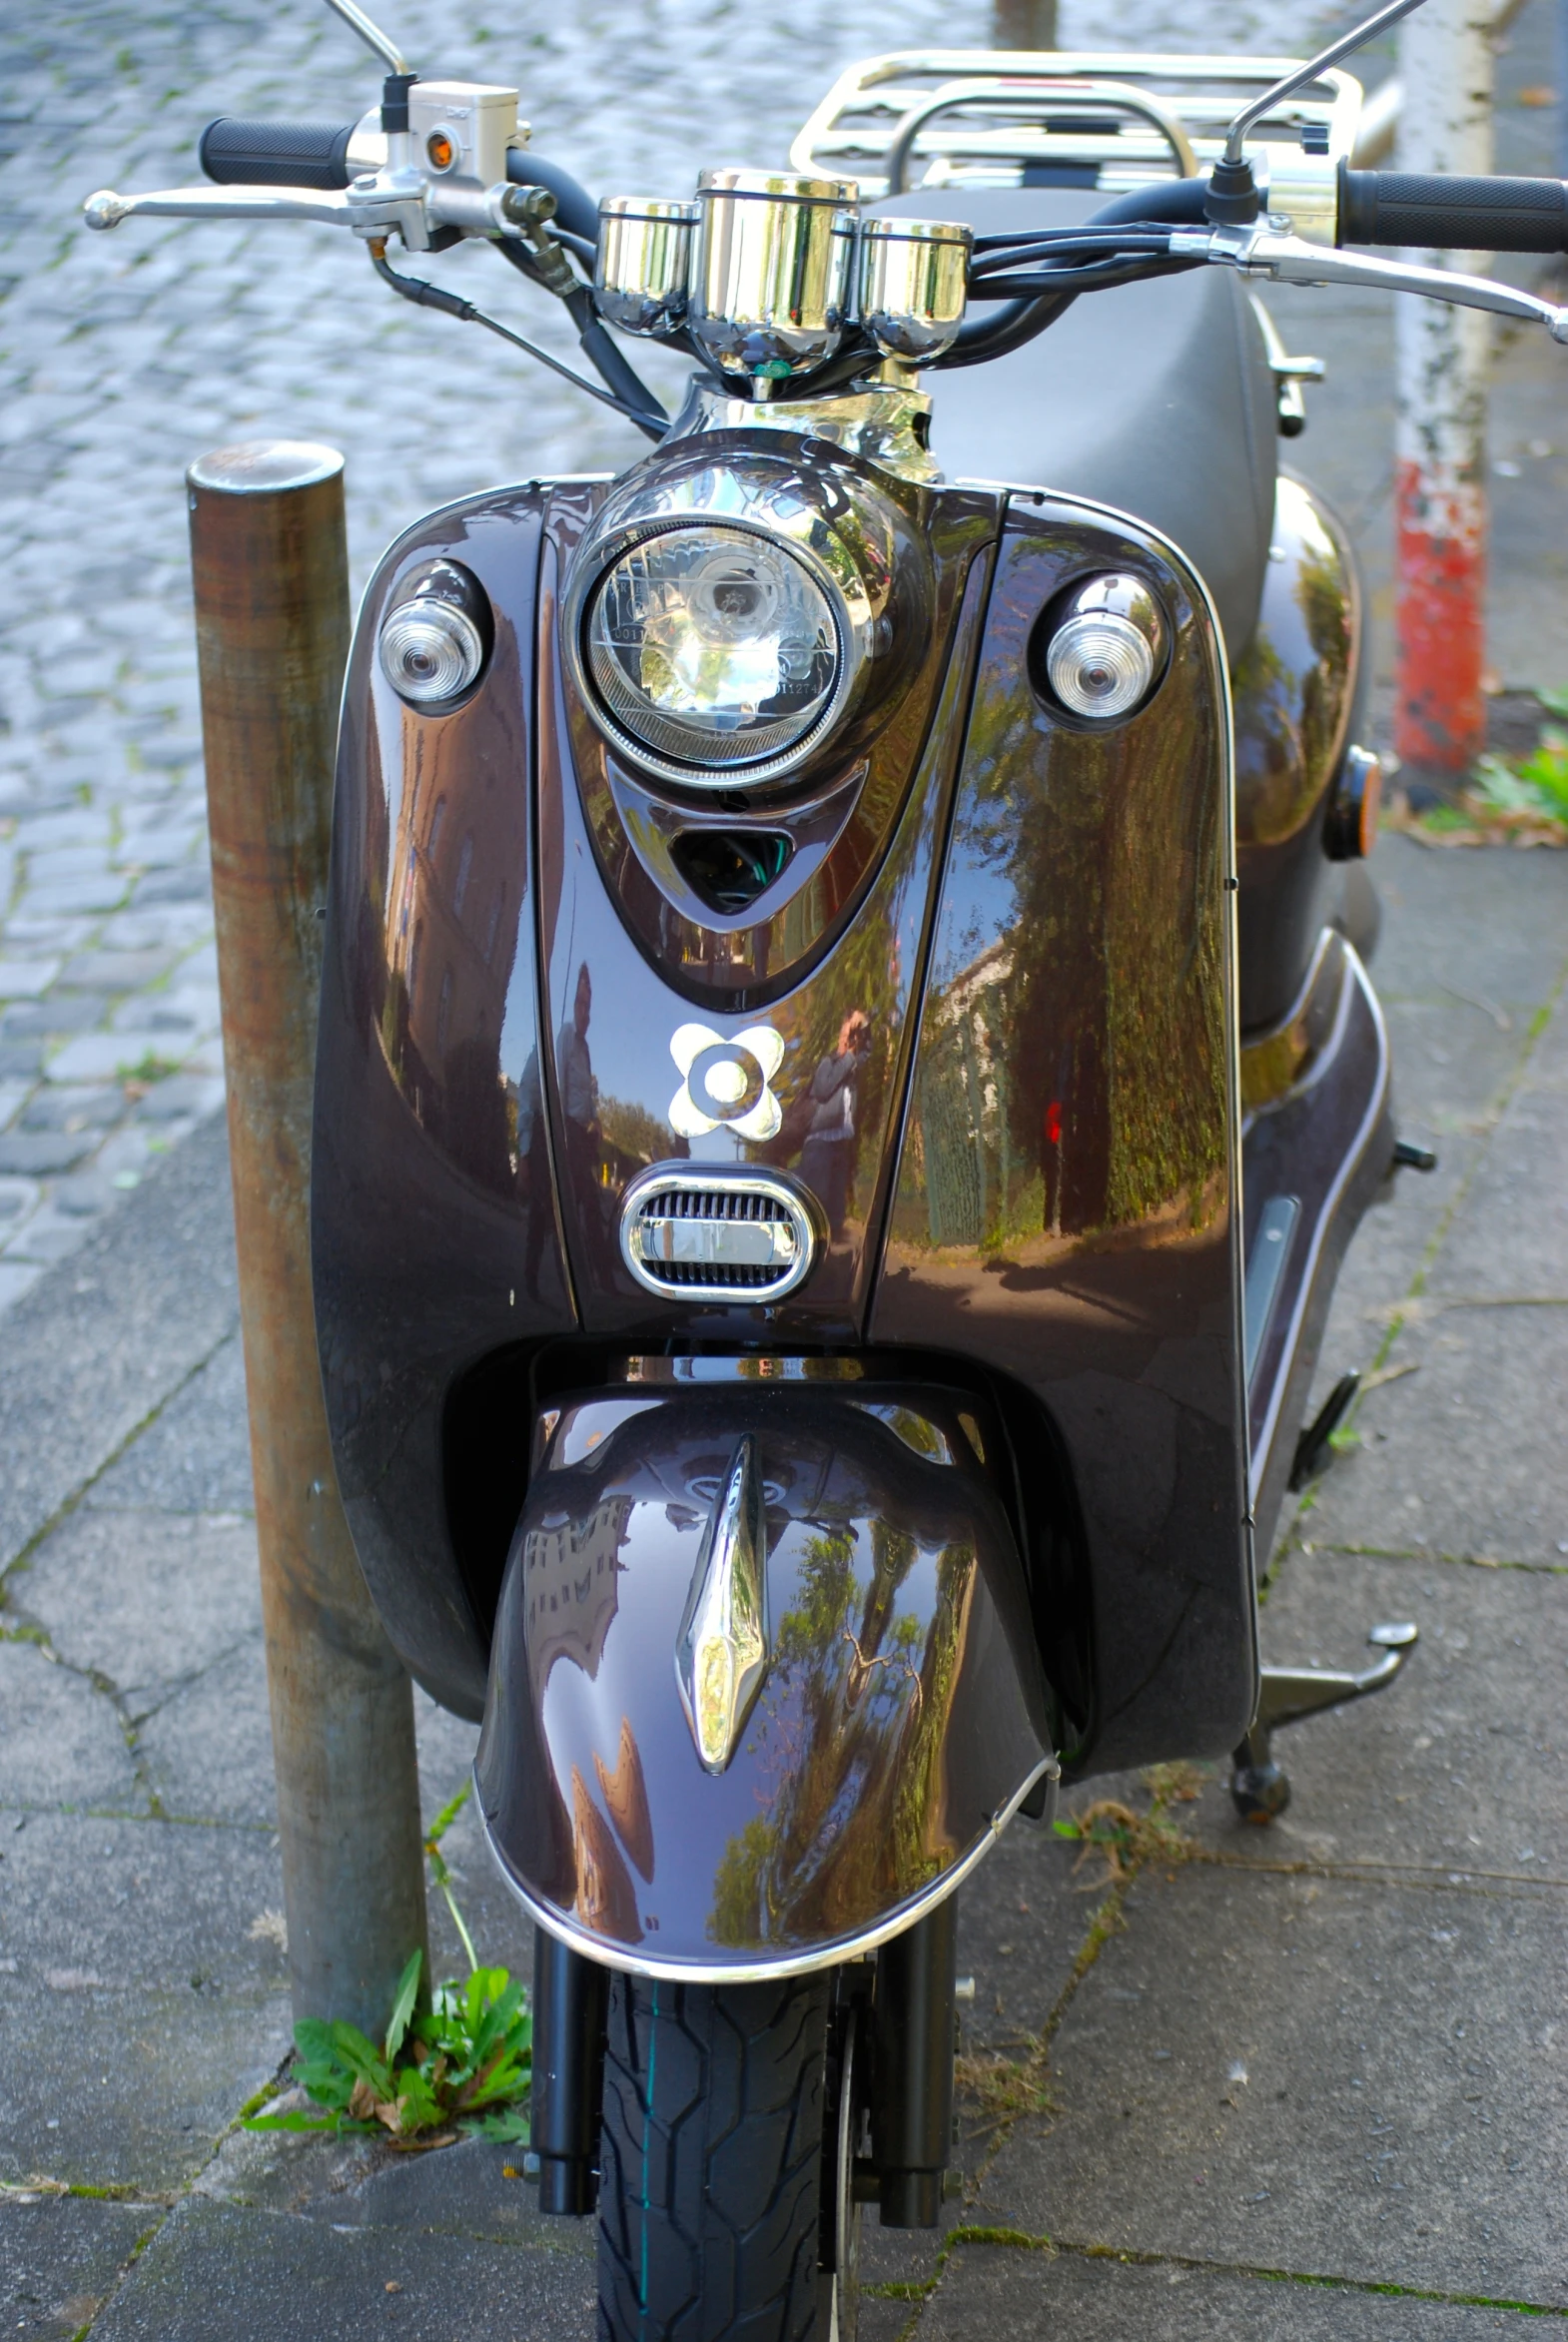 the headlight of an old fashioned moped parked on the side of the road